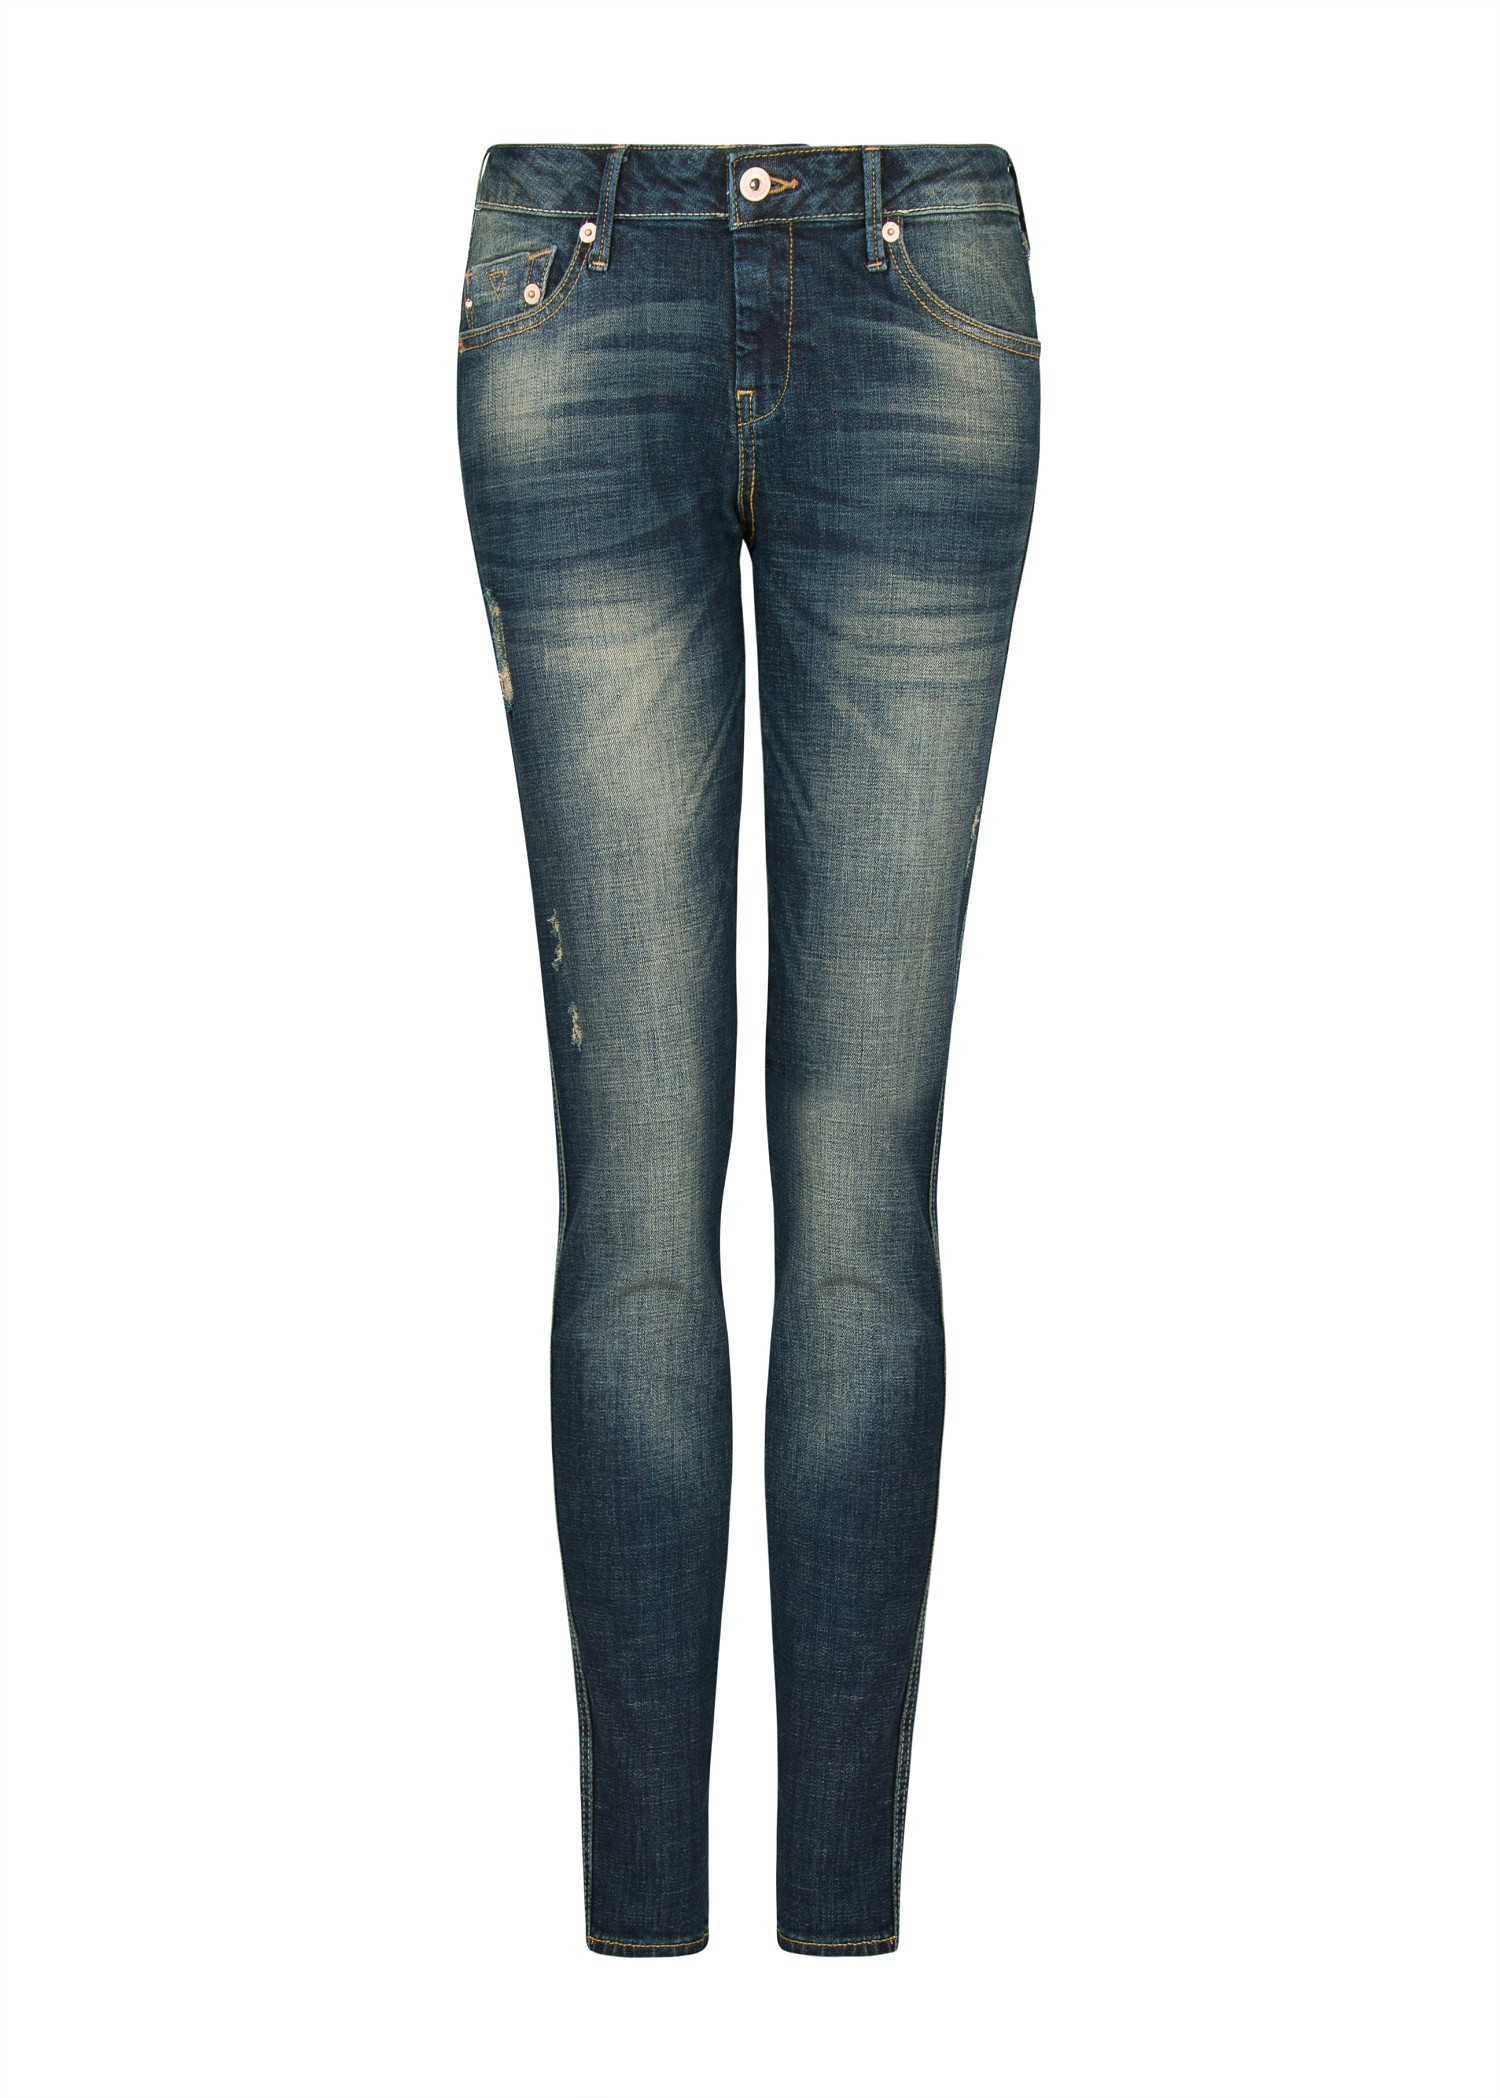 Lyst - Mango Push Up Uptown Jeans in Blue